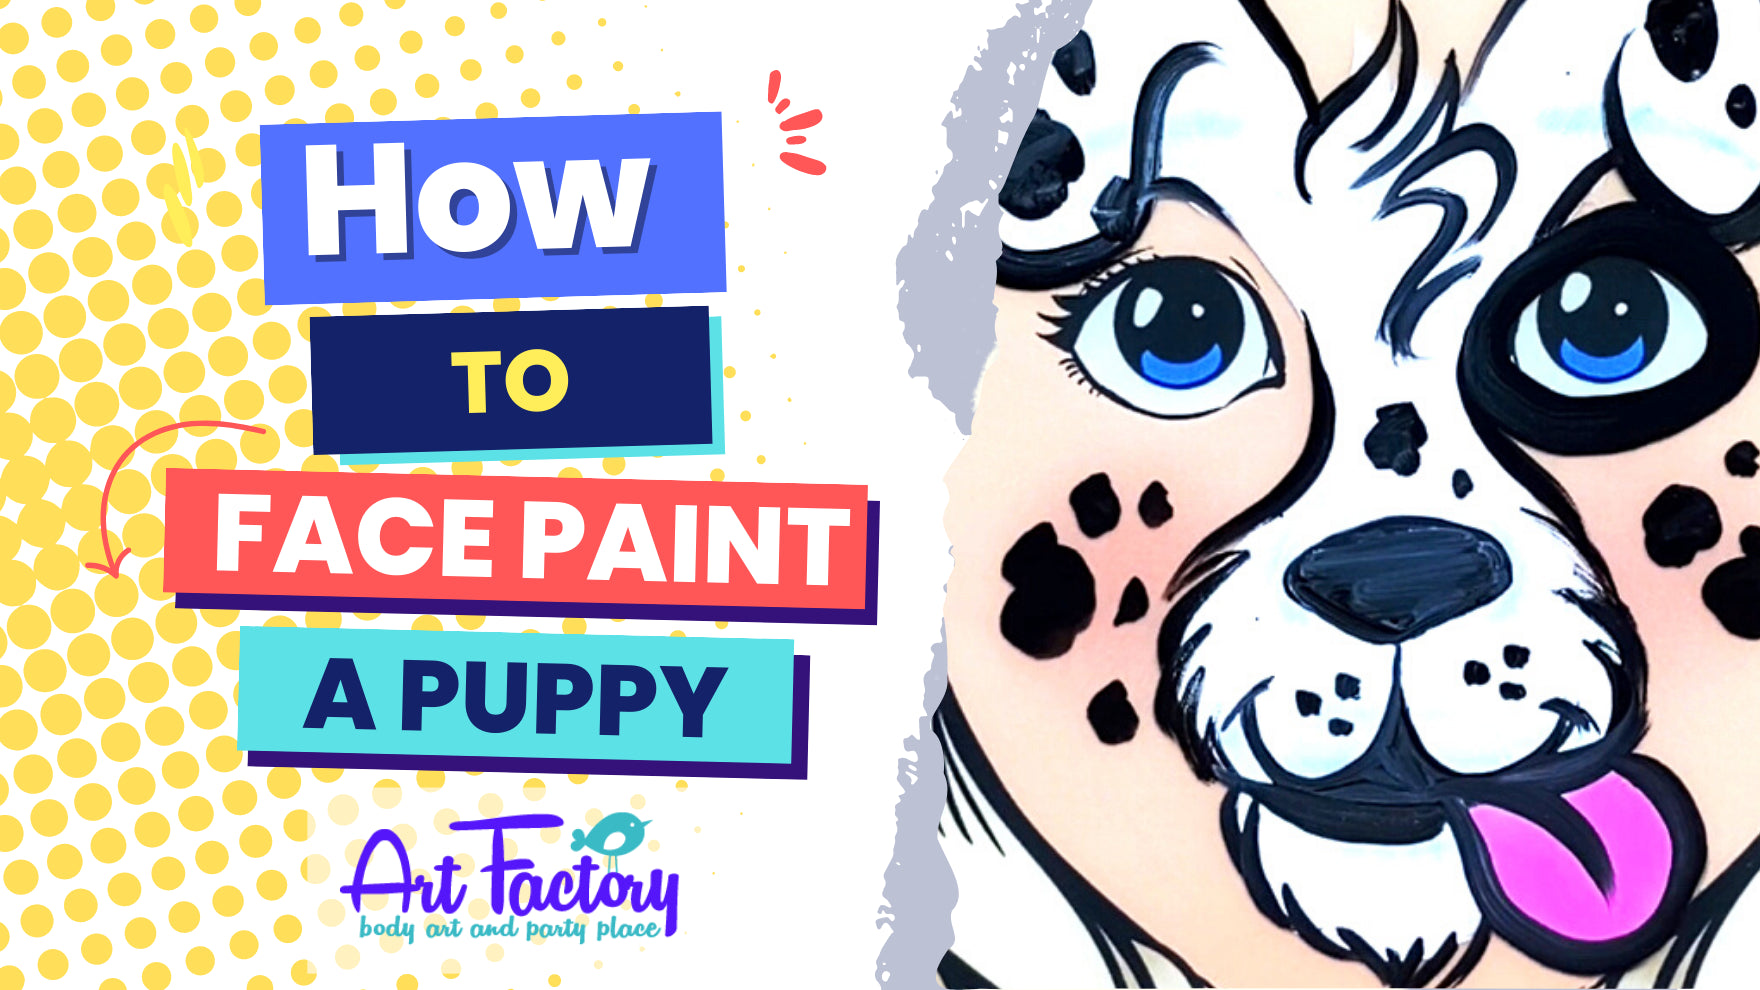 How to Face Paint a Puppy Dog!